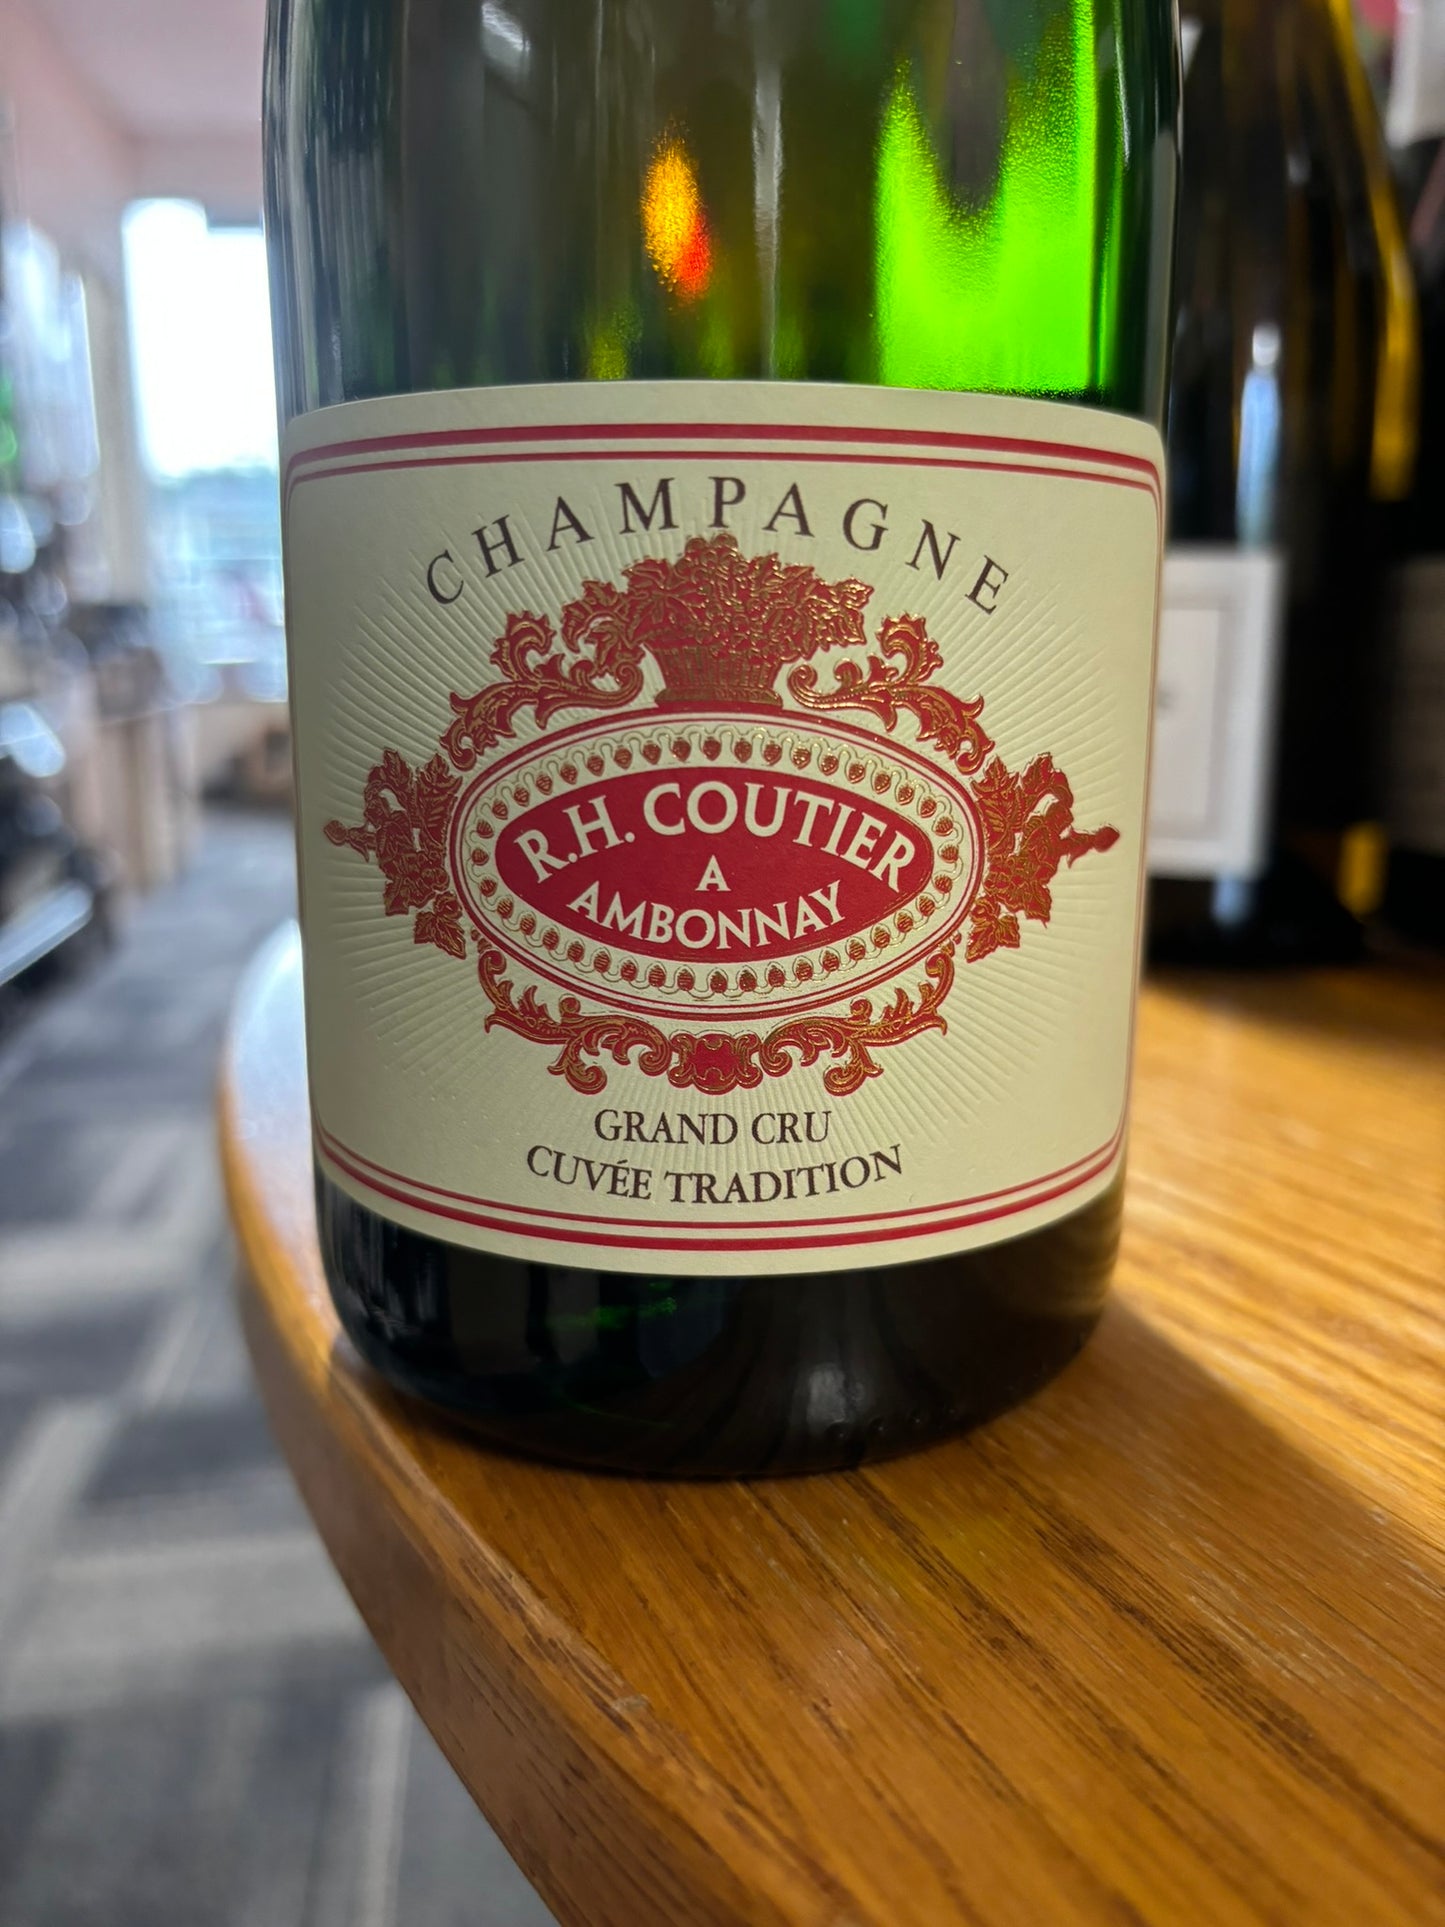 R. H. COUTIER NV Champagne 'Grand Cru Cuvee Tradition' (Ambonnay, France)